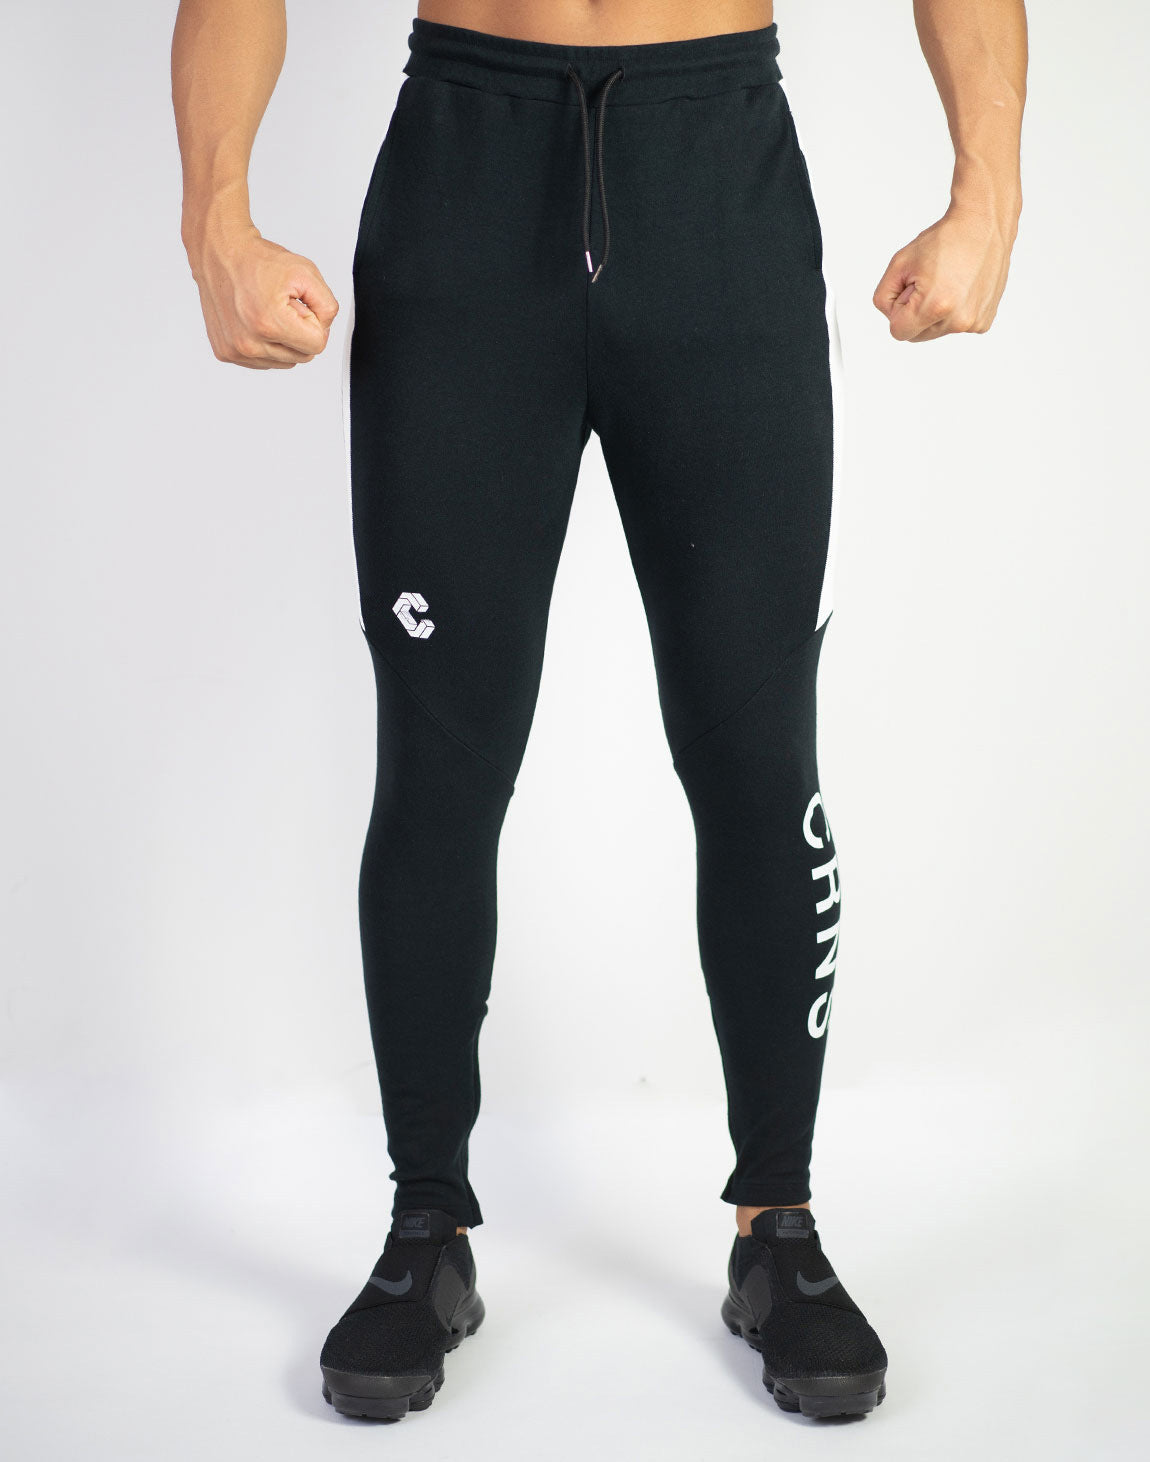 Muscle brothers fitness men sports leisure running exercise cotton stretch Slim pants